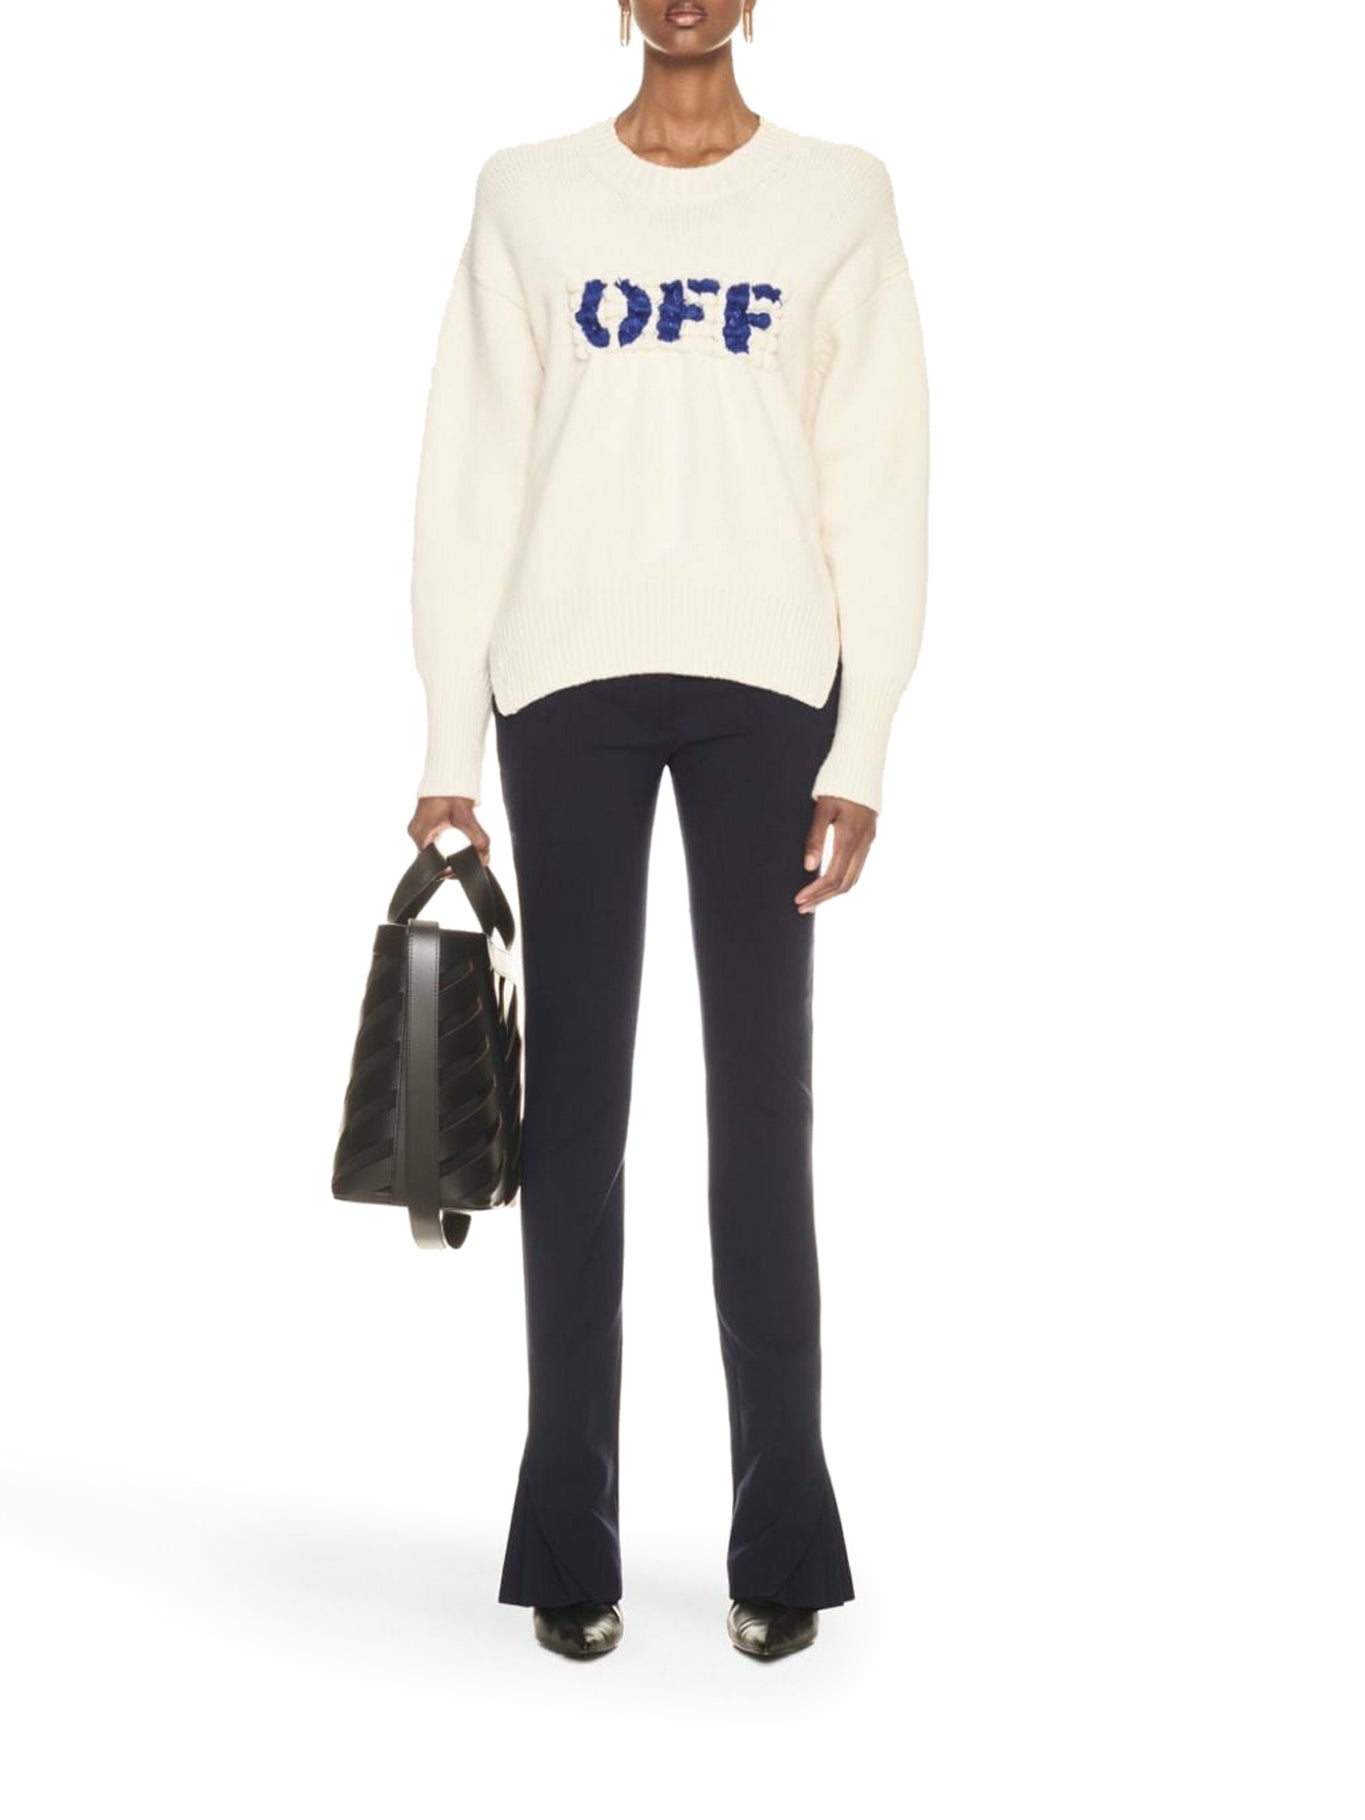 Sweater with OFF logo